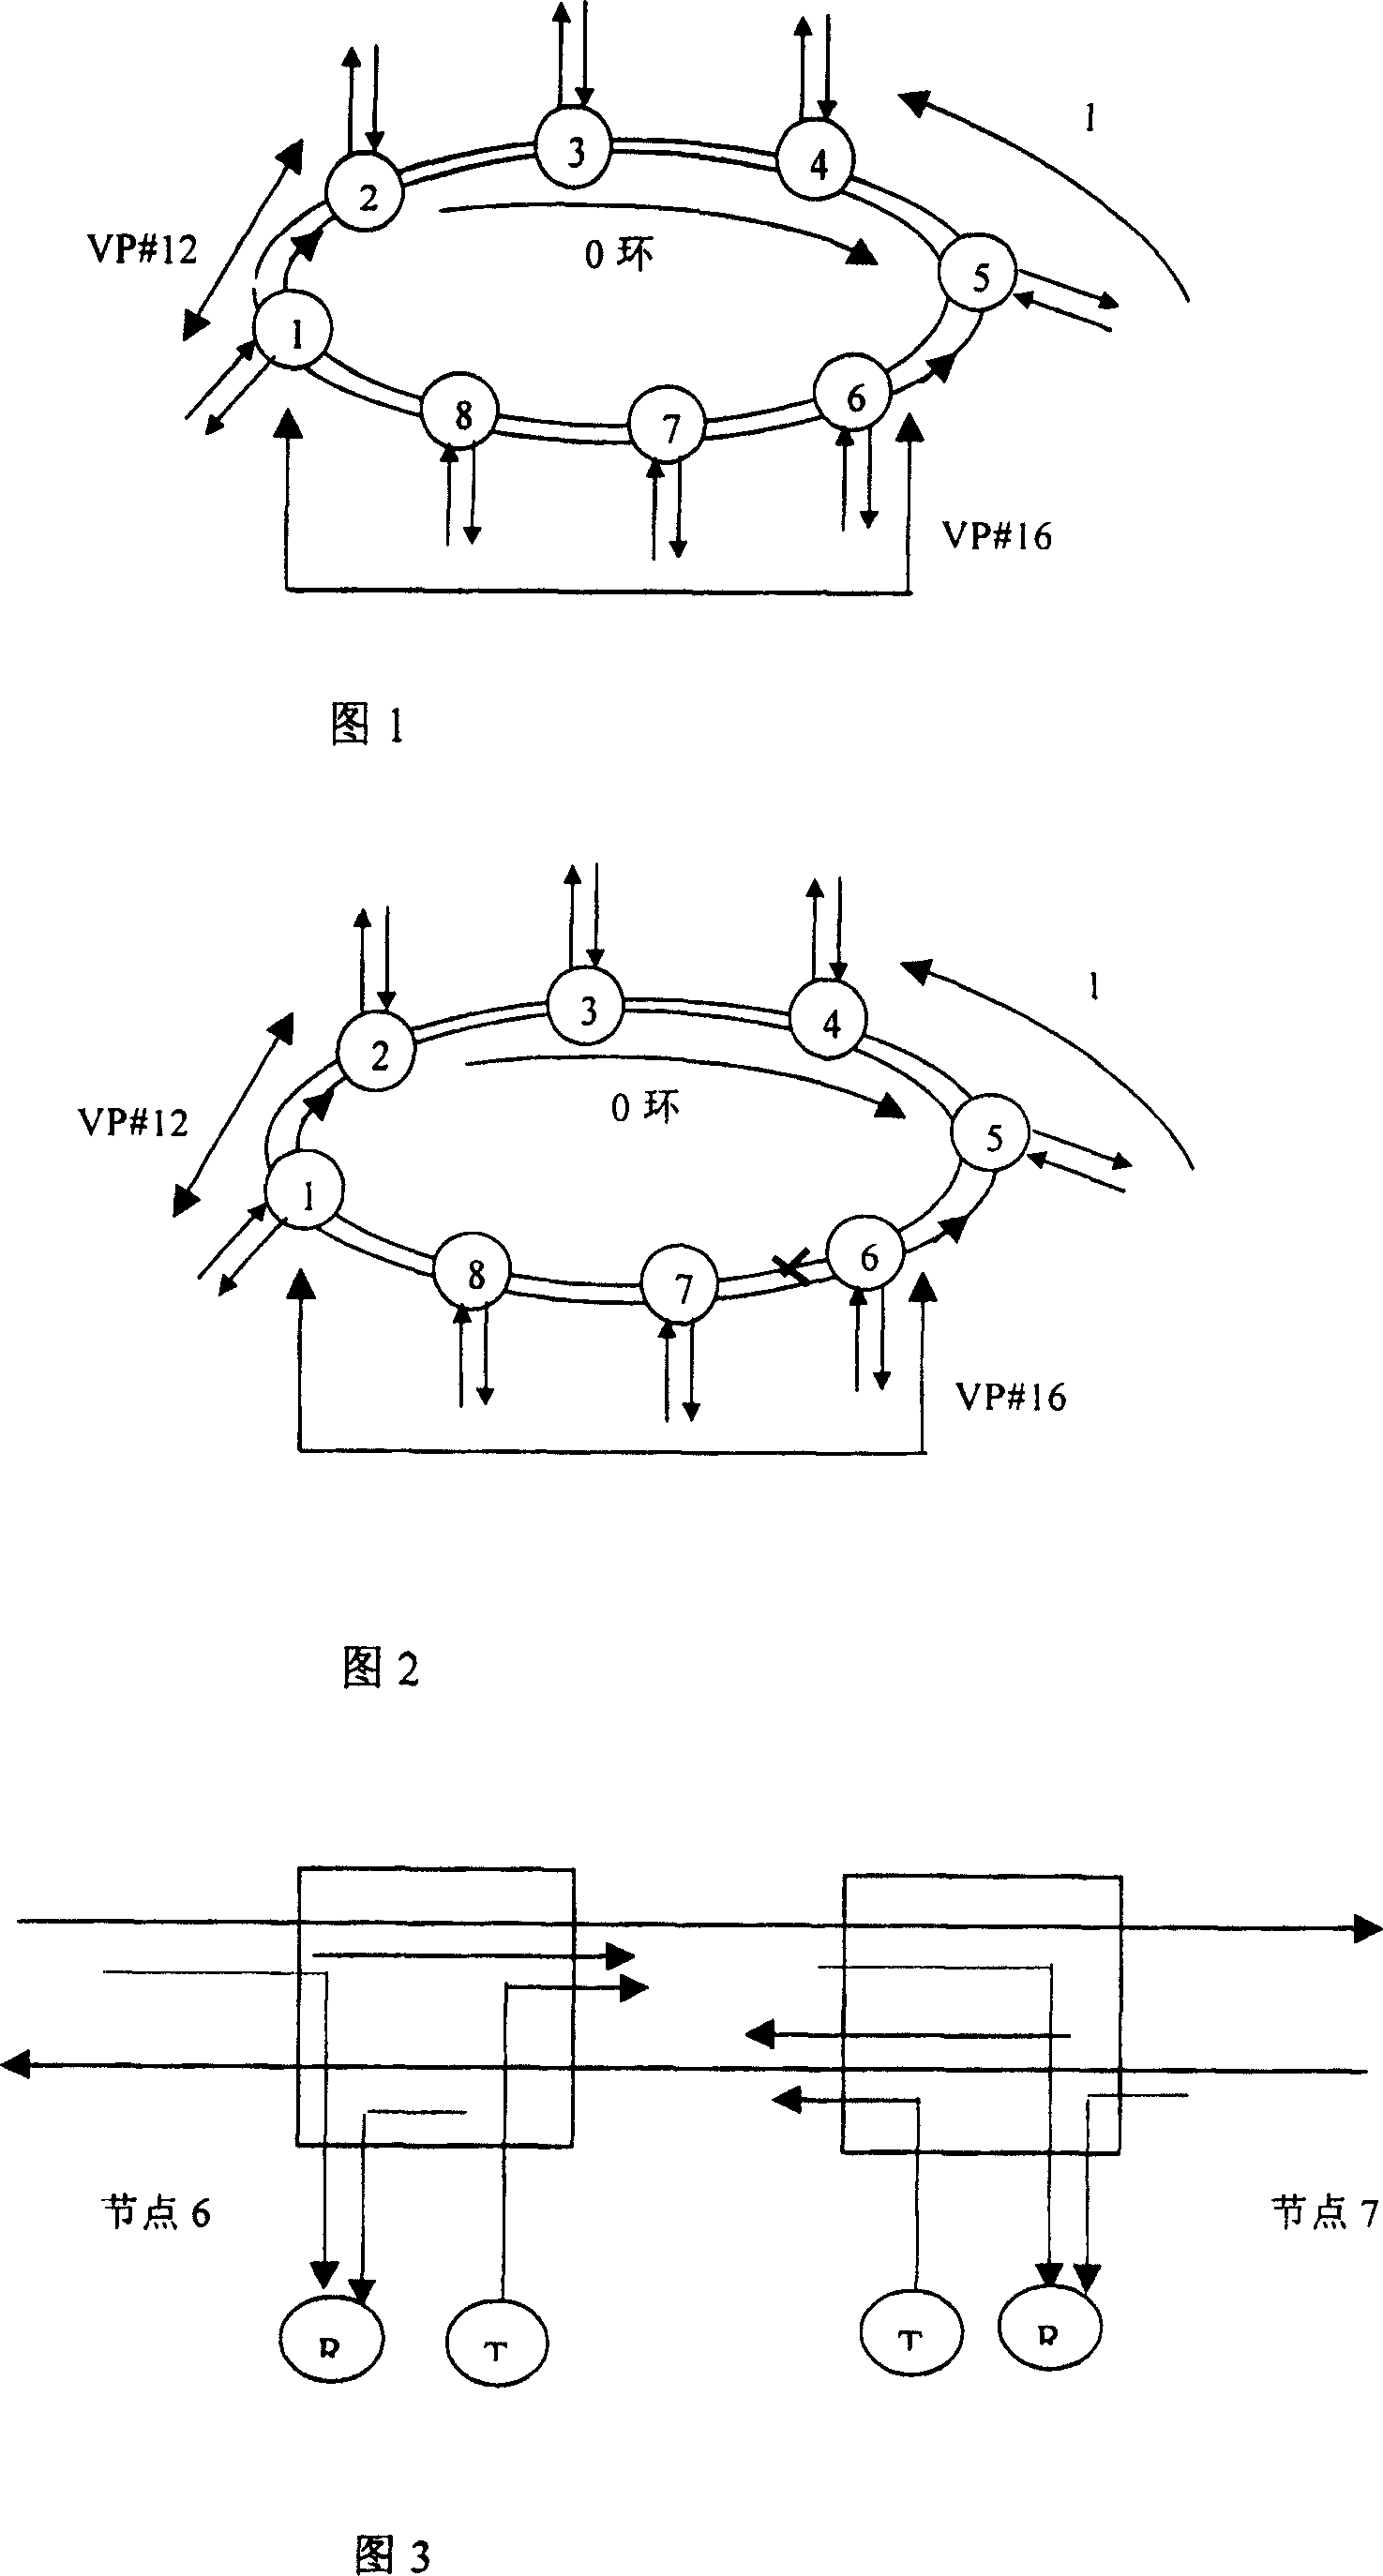 Method for carrying out VPR protection inversion in network